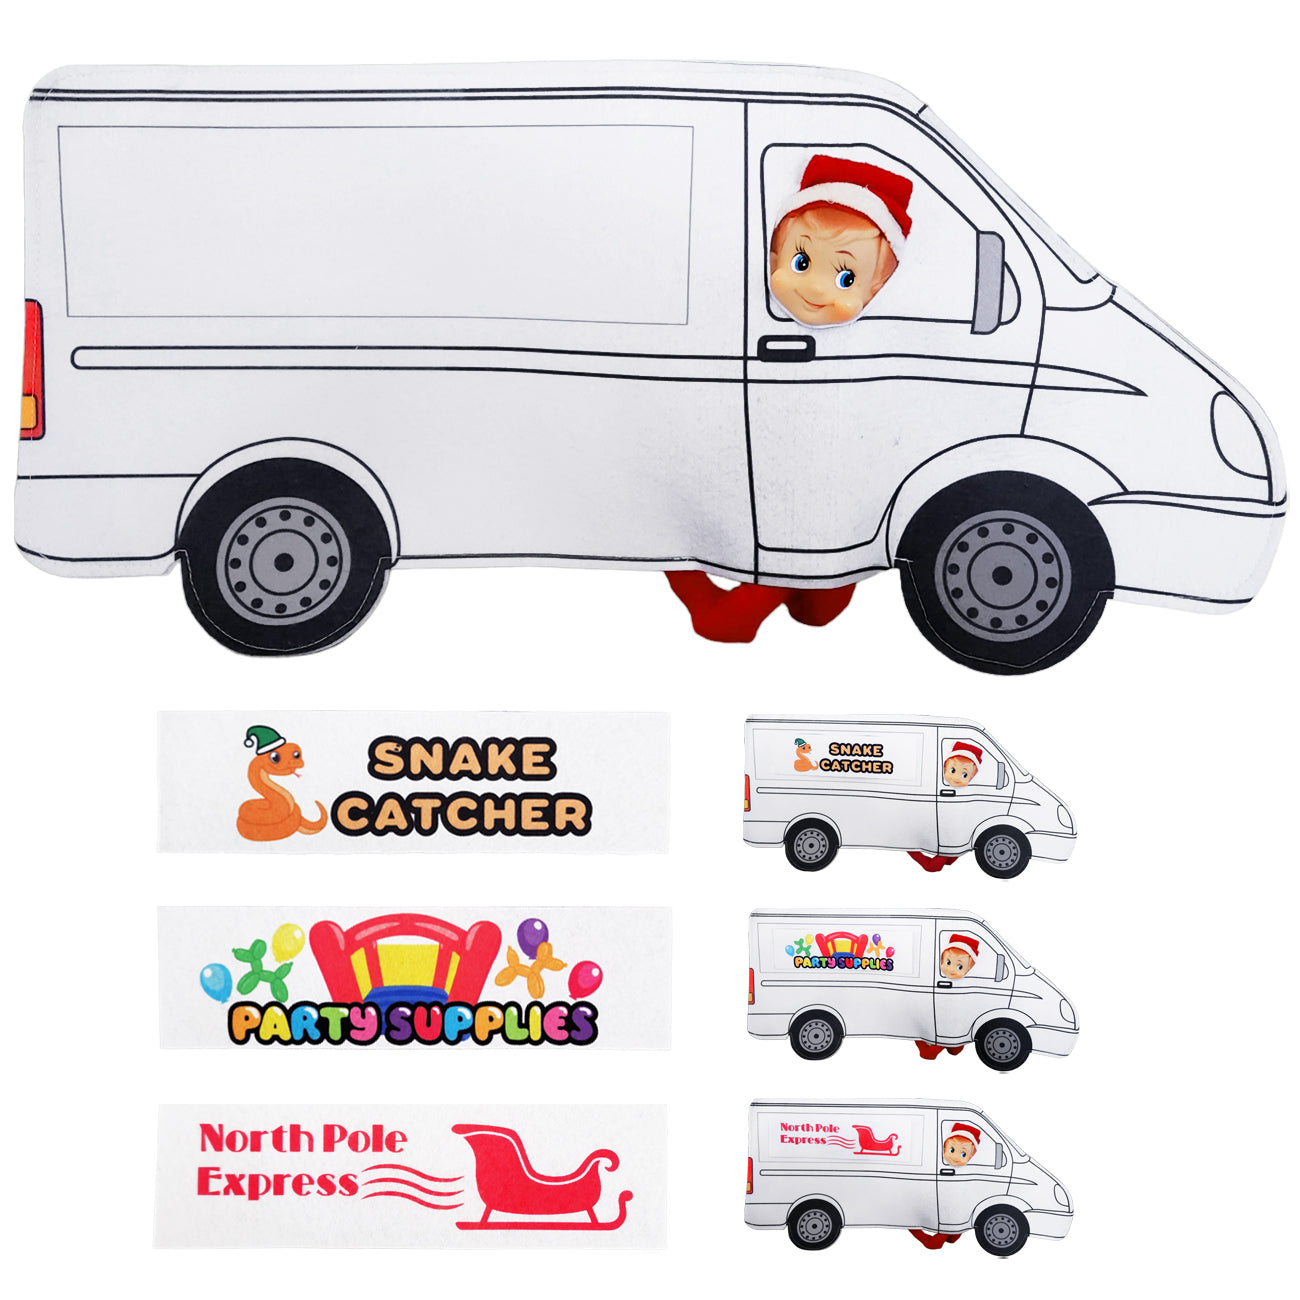 Van elf costume with interchangeable business signs. Turn it into a snake catcher, a party supplies business or a postal service